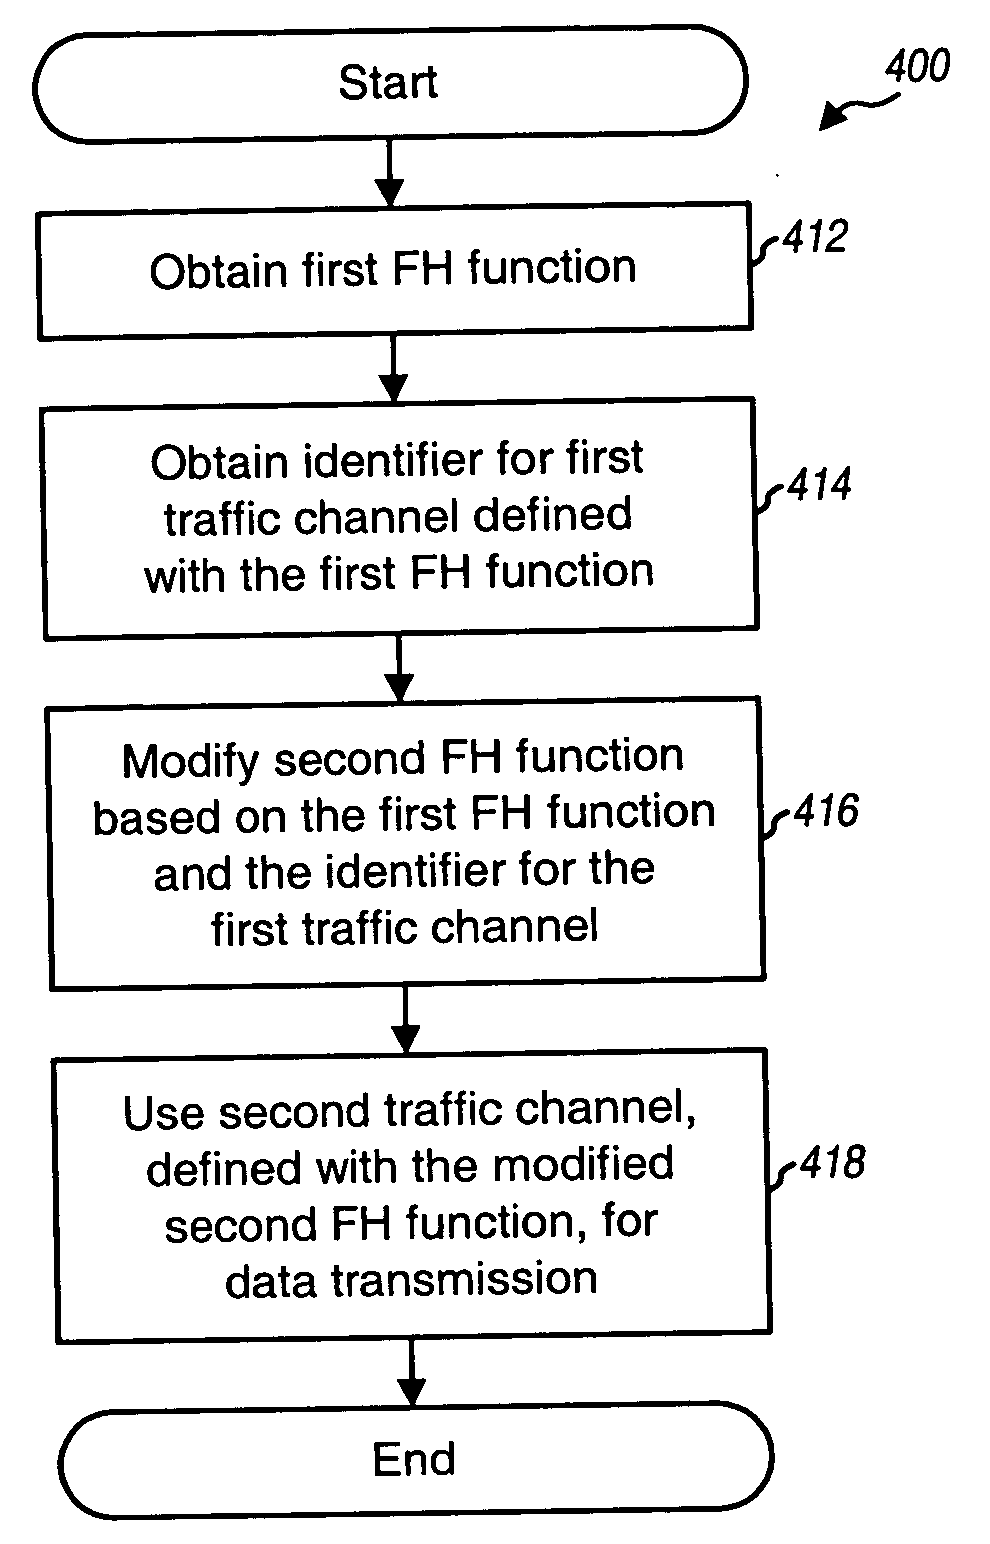 Interference management for soft handoff and broadcast services in a wireless frequency hopping communication system